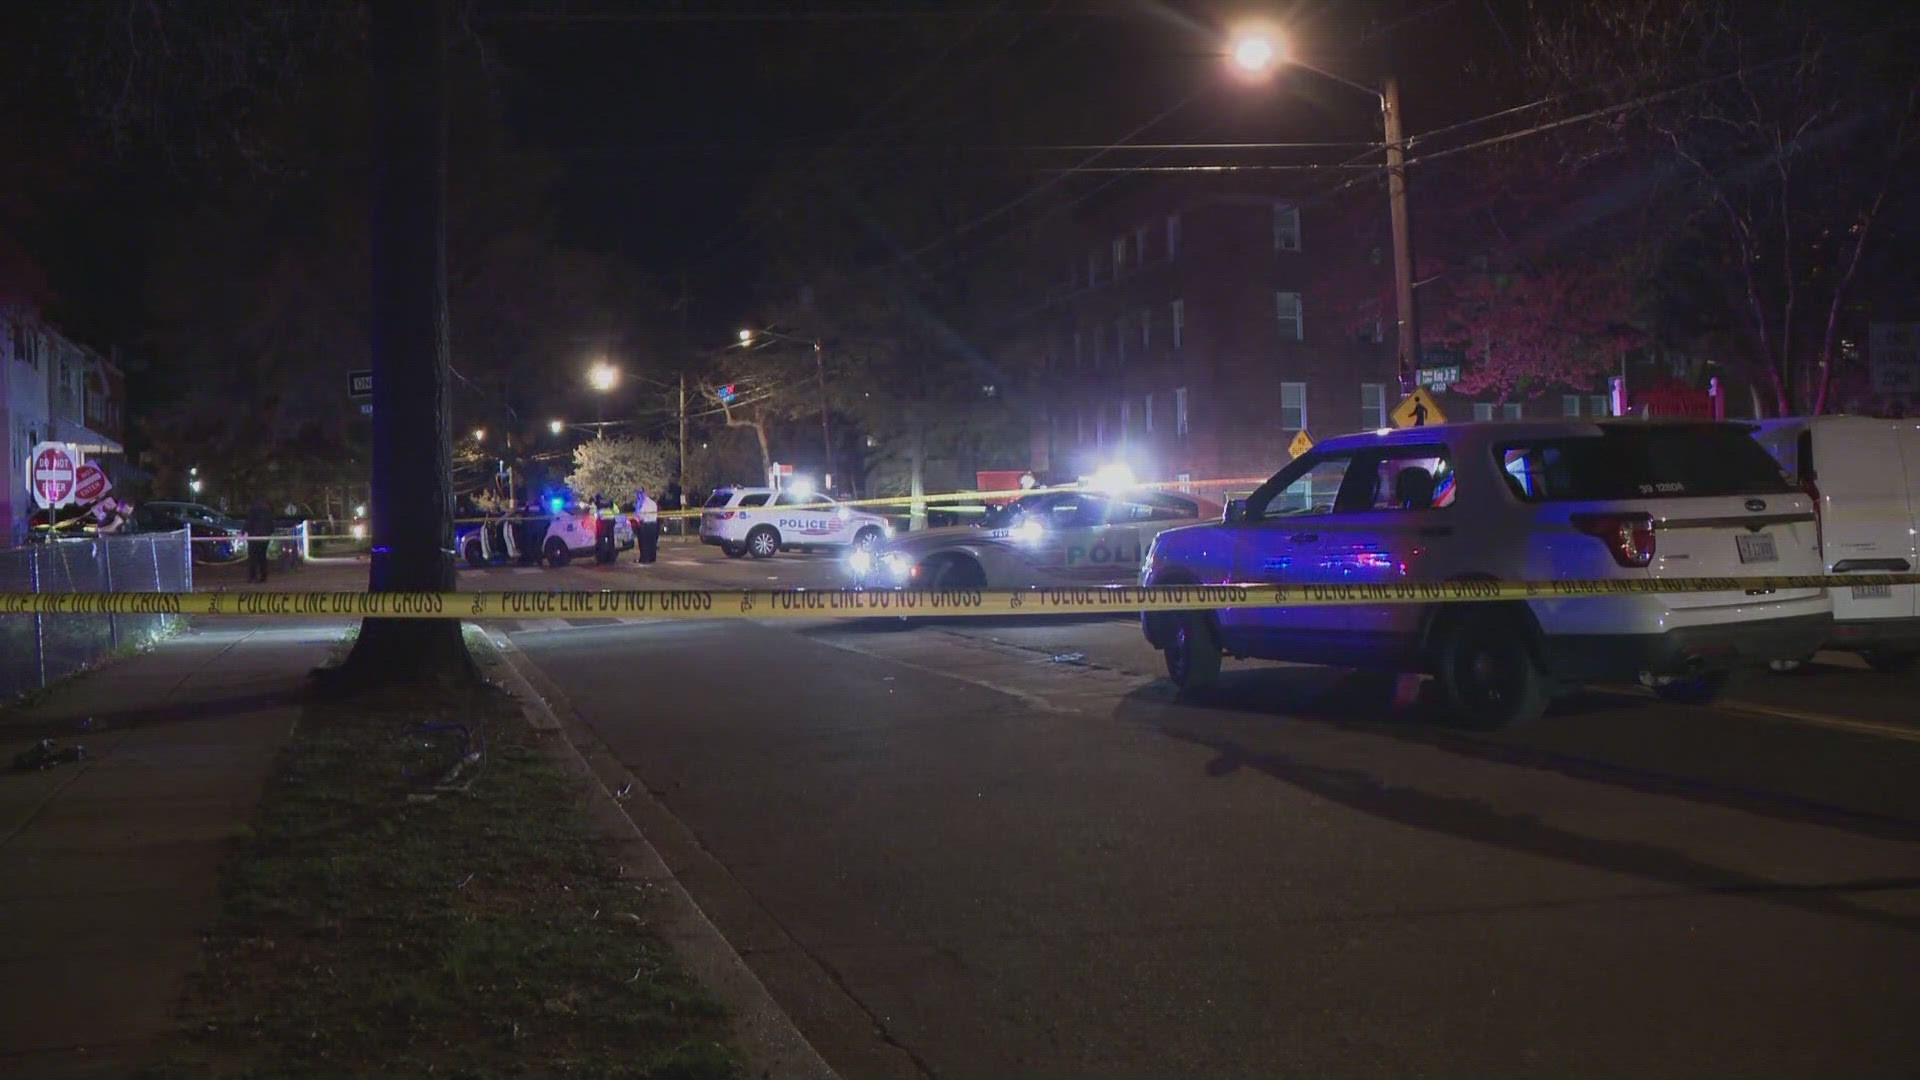 When police arrived at the 100 block of Elmira Street, they found three men and a woman suffering from gunshot wounds.